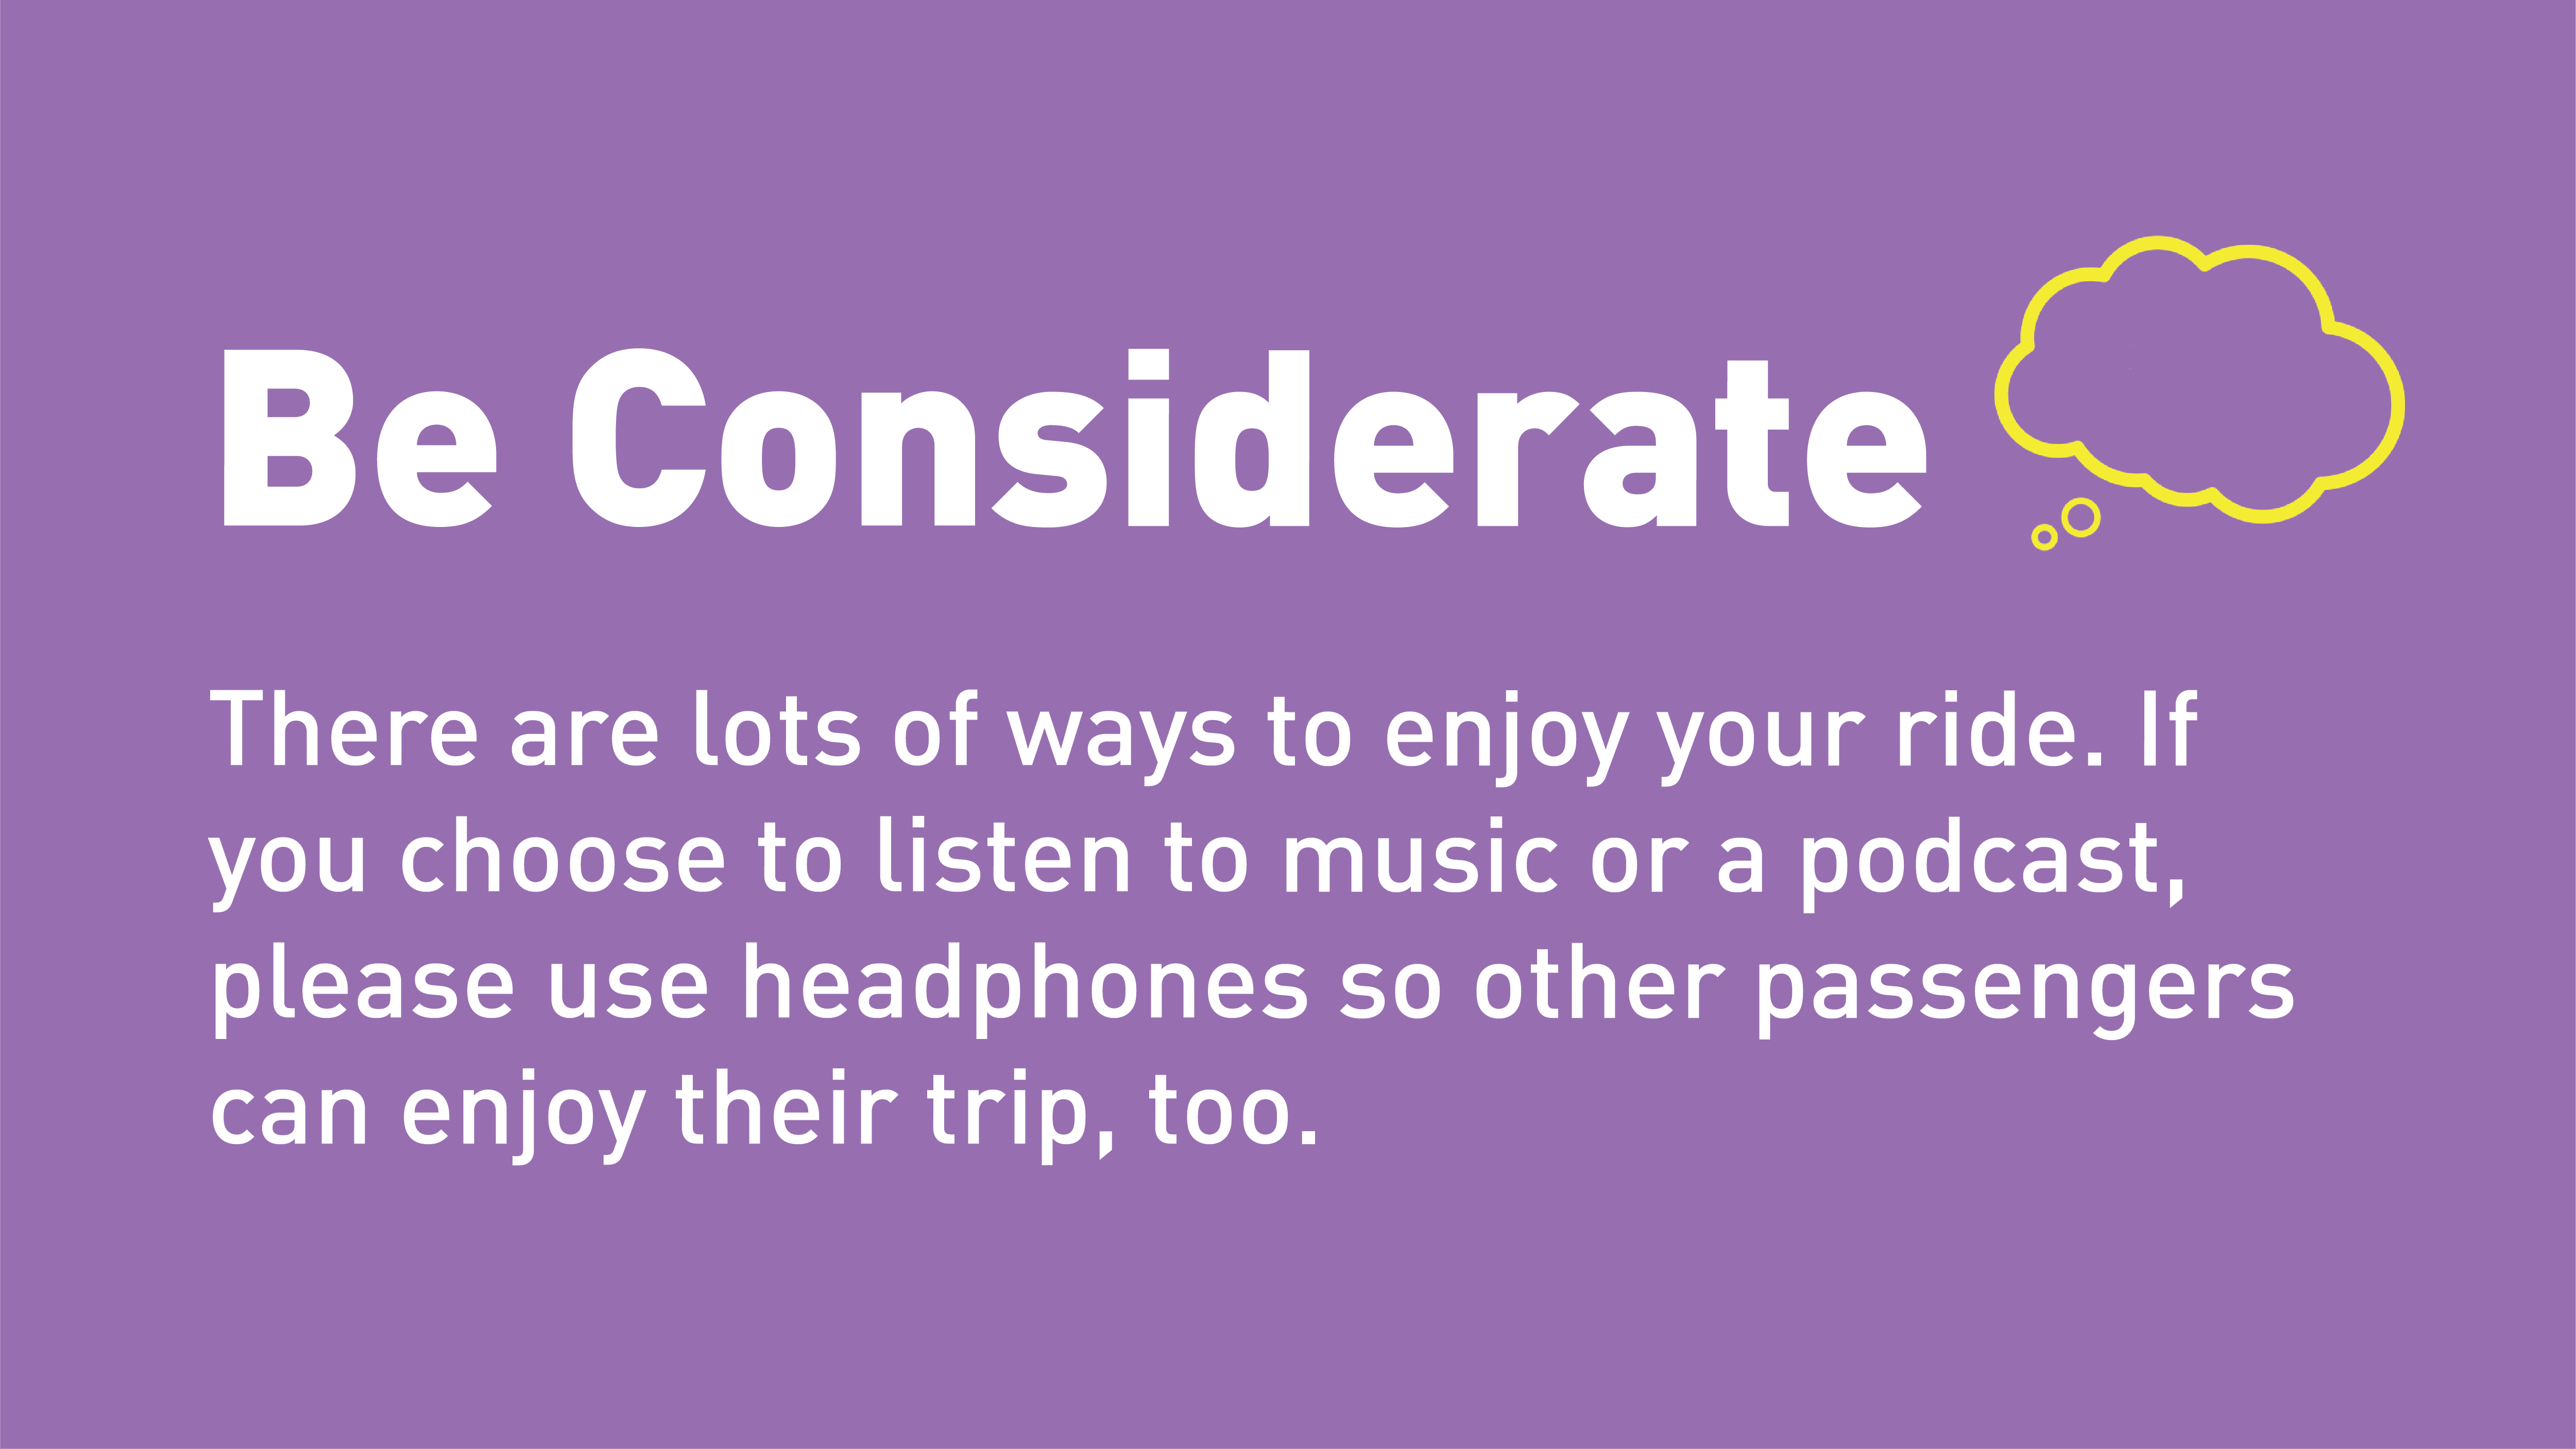 Be Considerate. Use headphones to listen to music or audio.